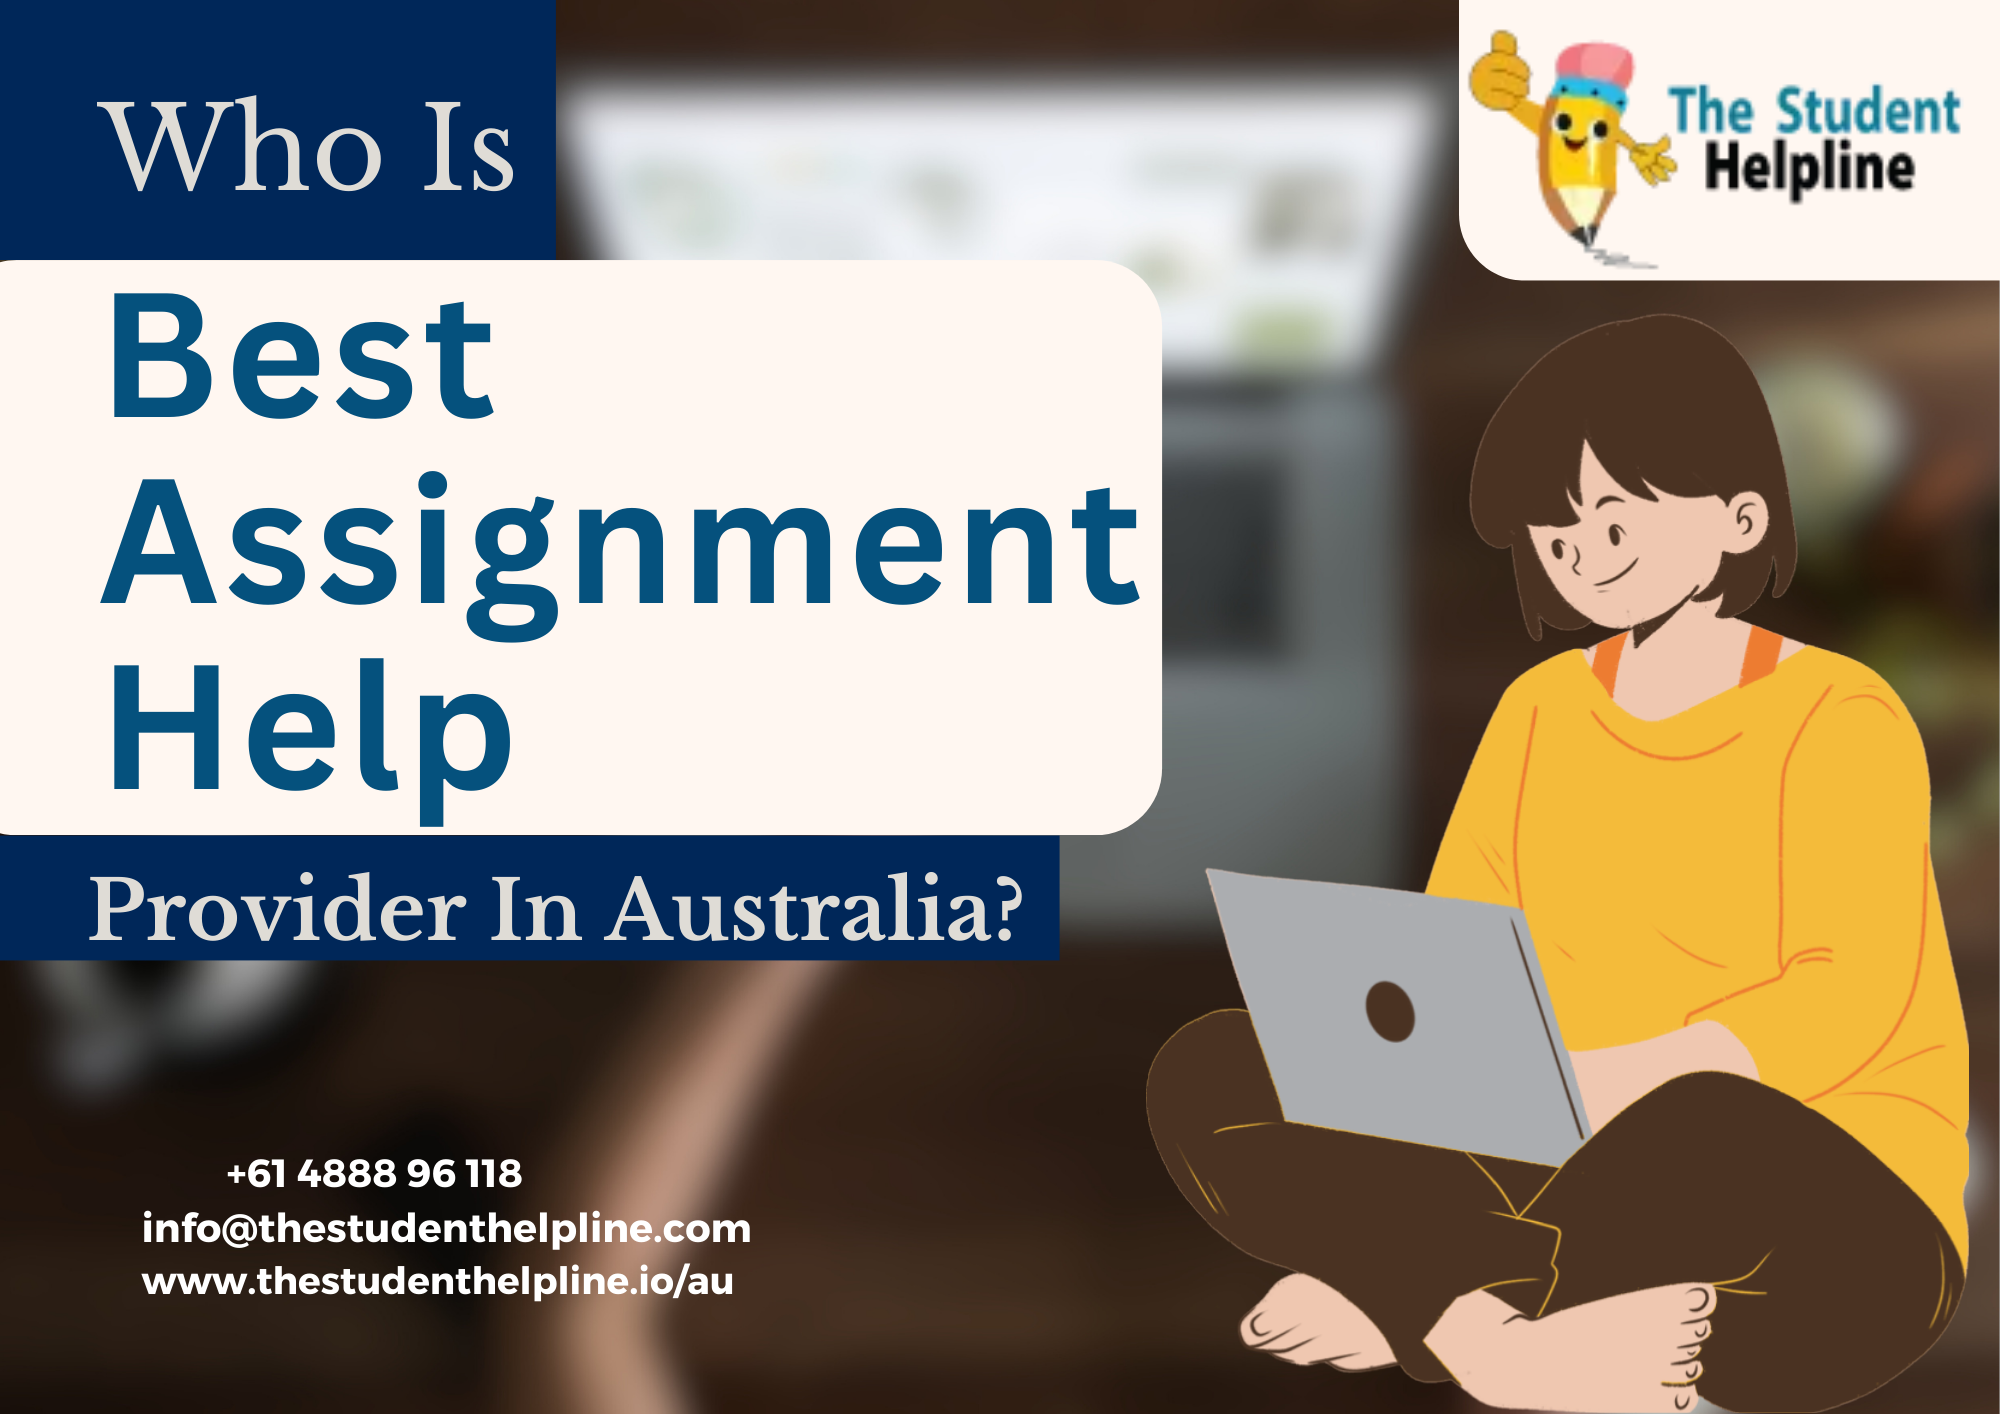 Who Is Best Assignment Help Provider In Australia?